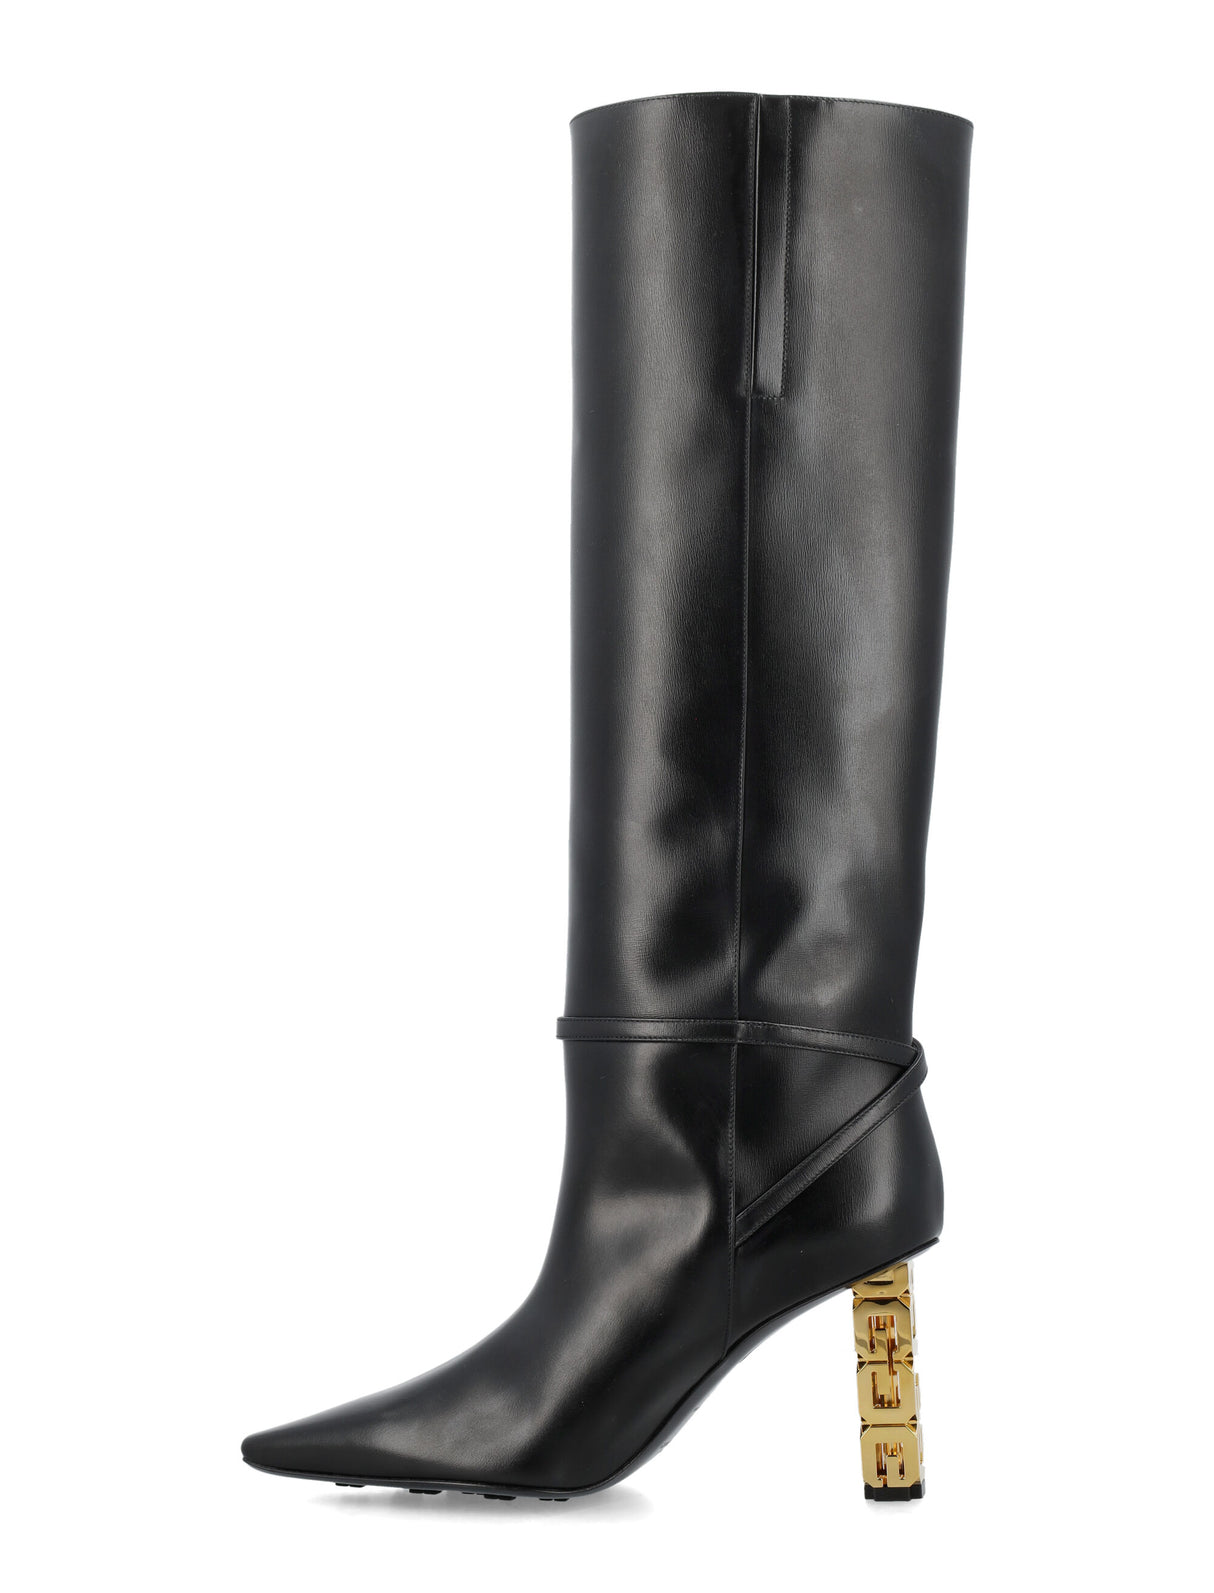 Sculpted Heel Leather High Boots for Women by Givenchy